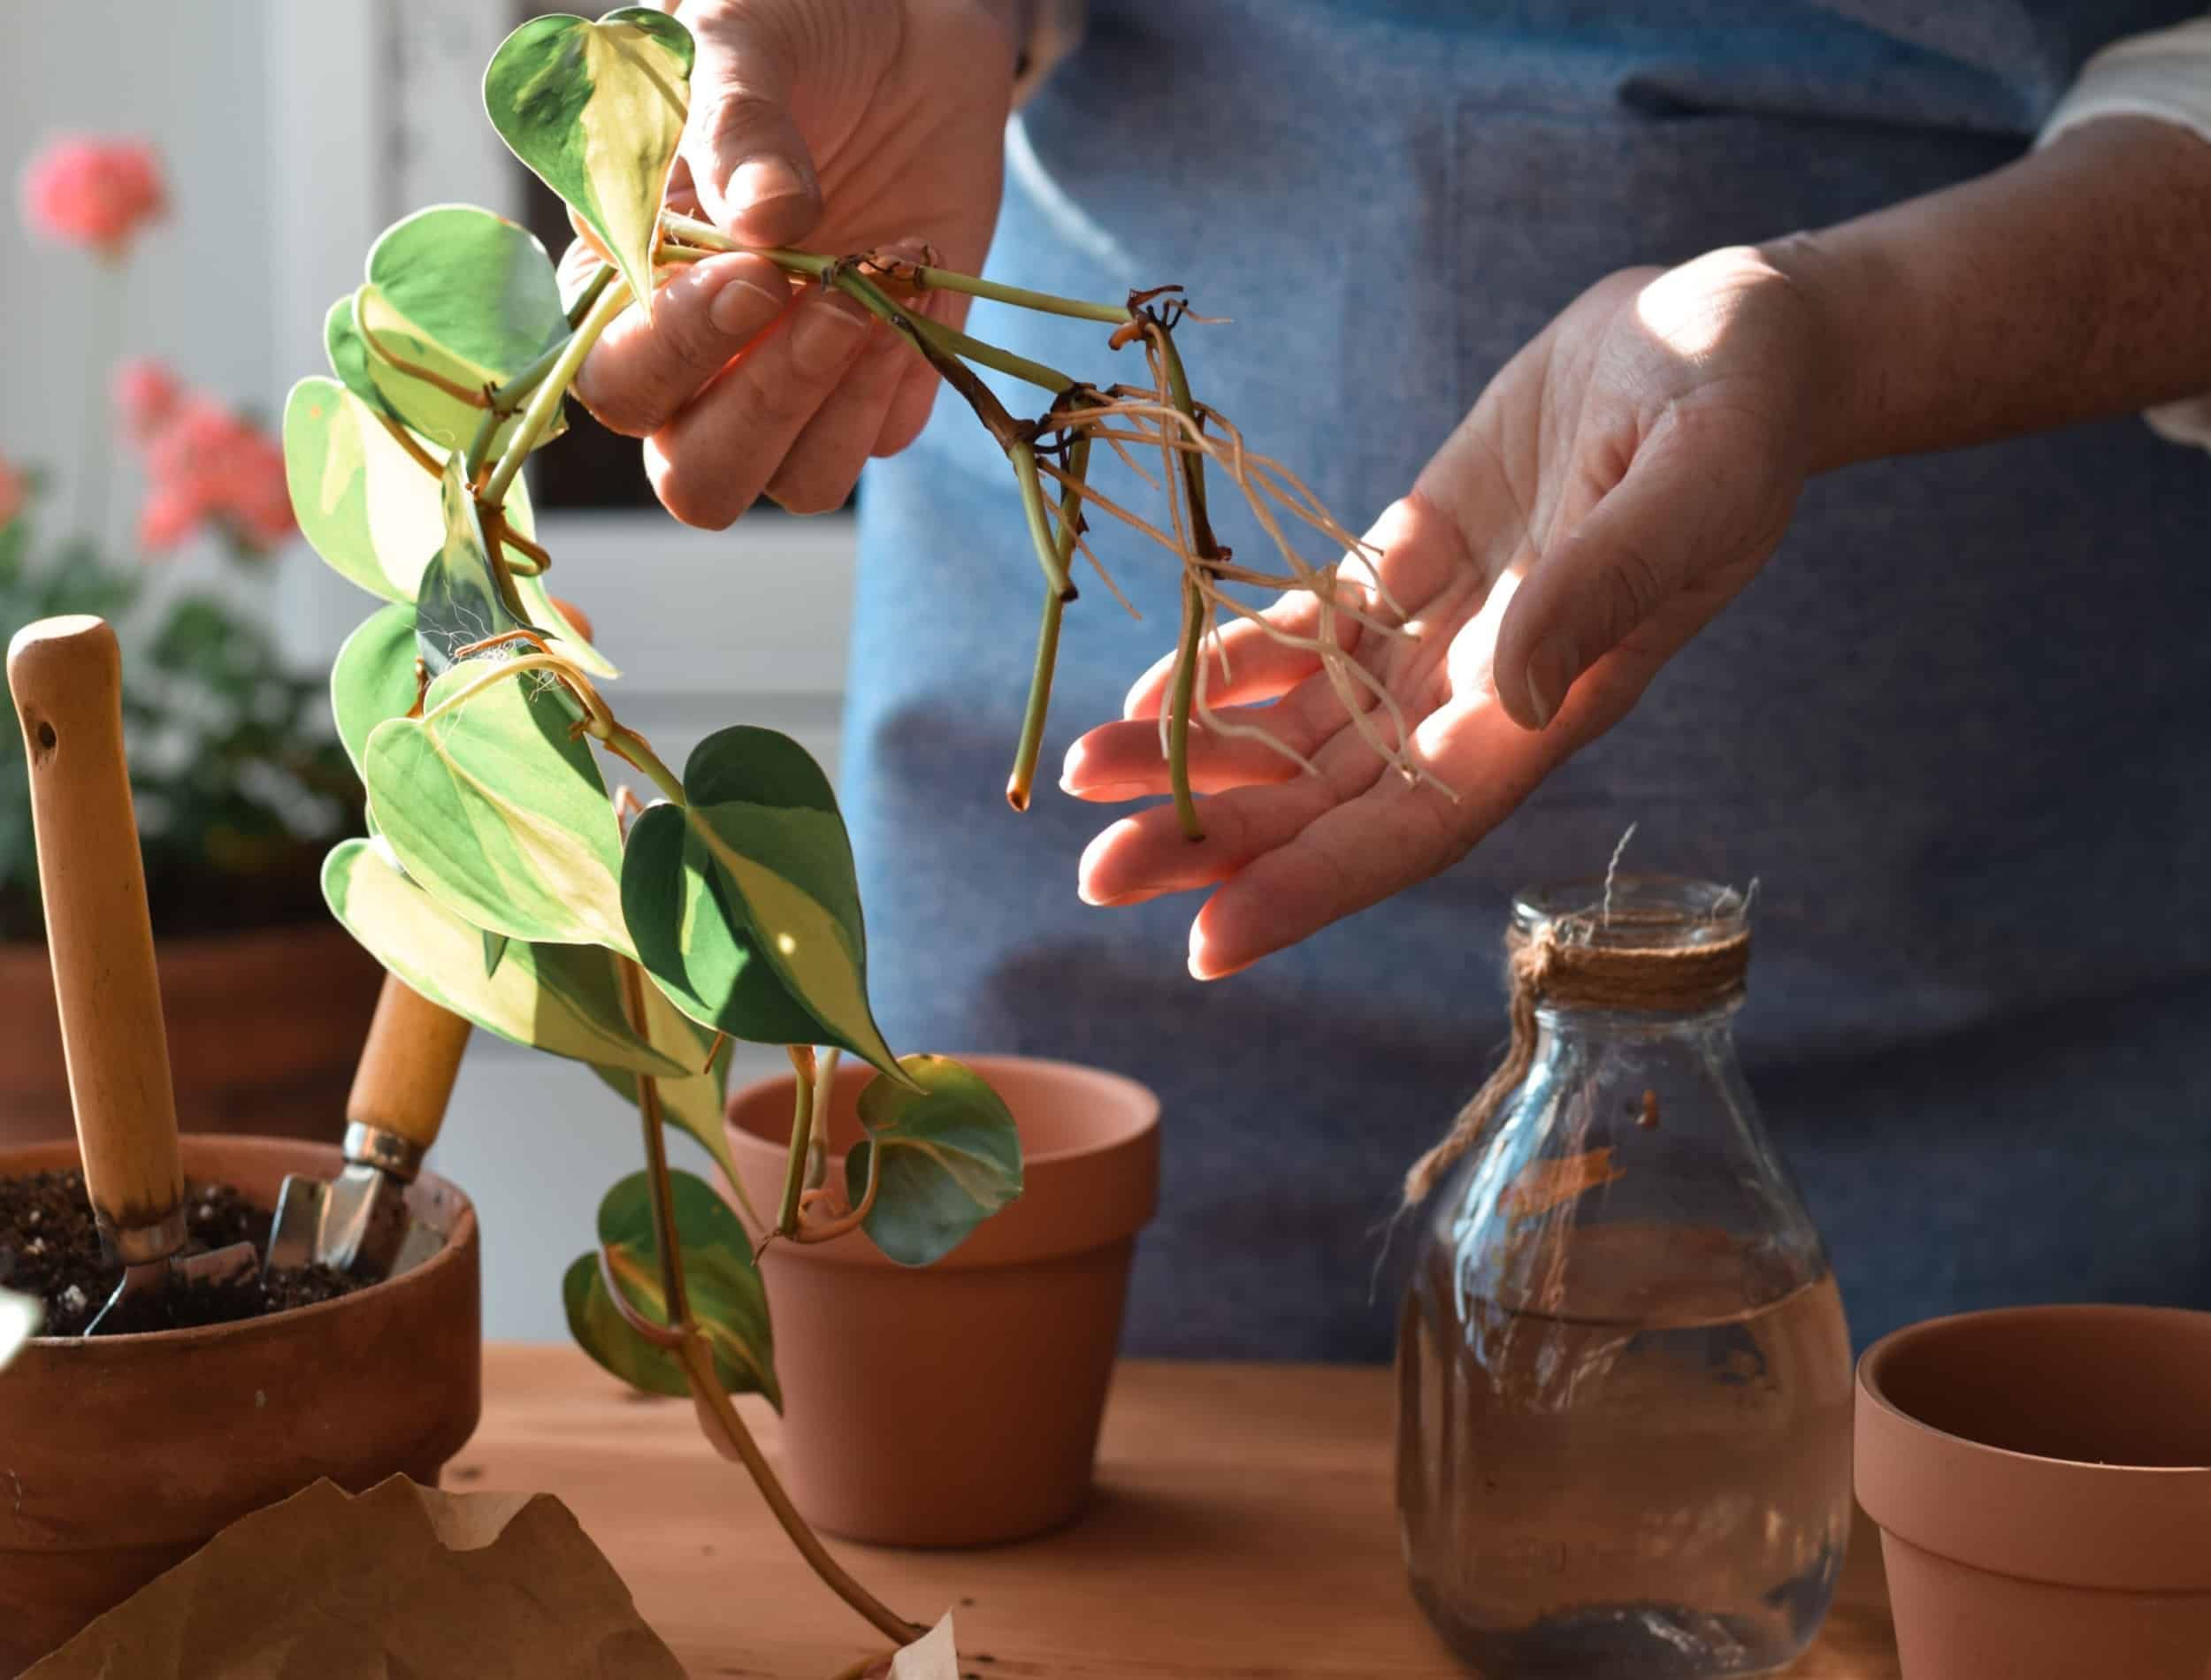 Woman is holding pothos plant cuttings with roots ready to be planted